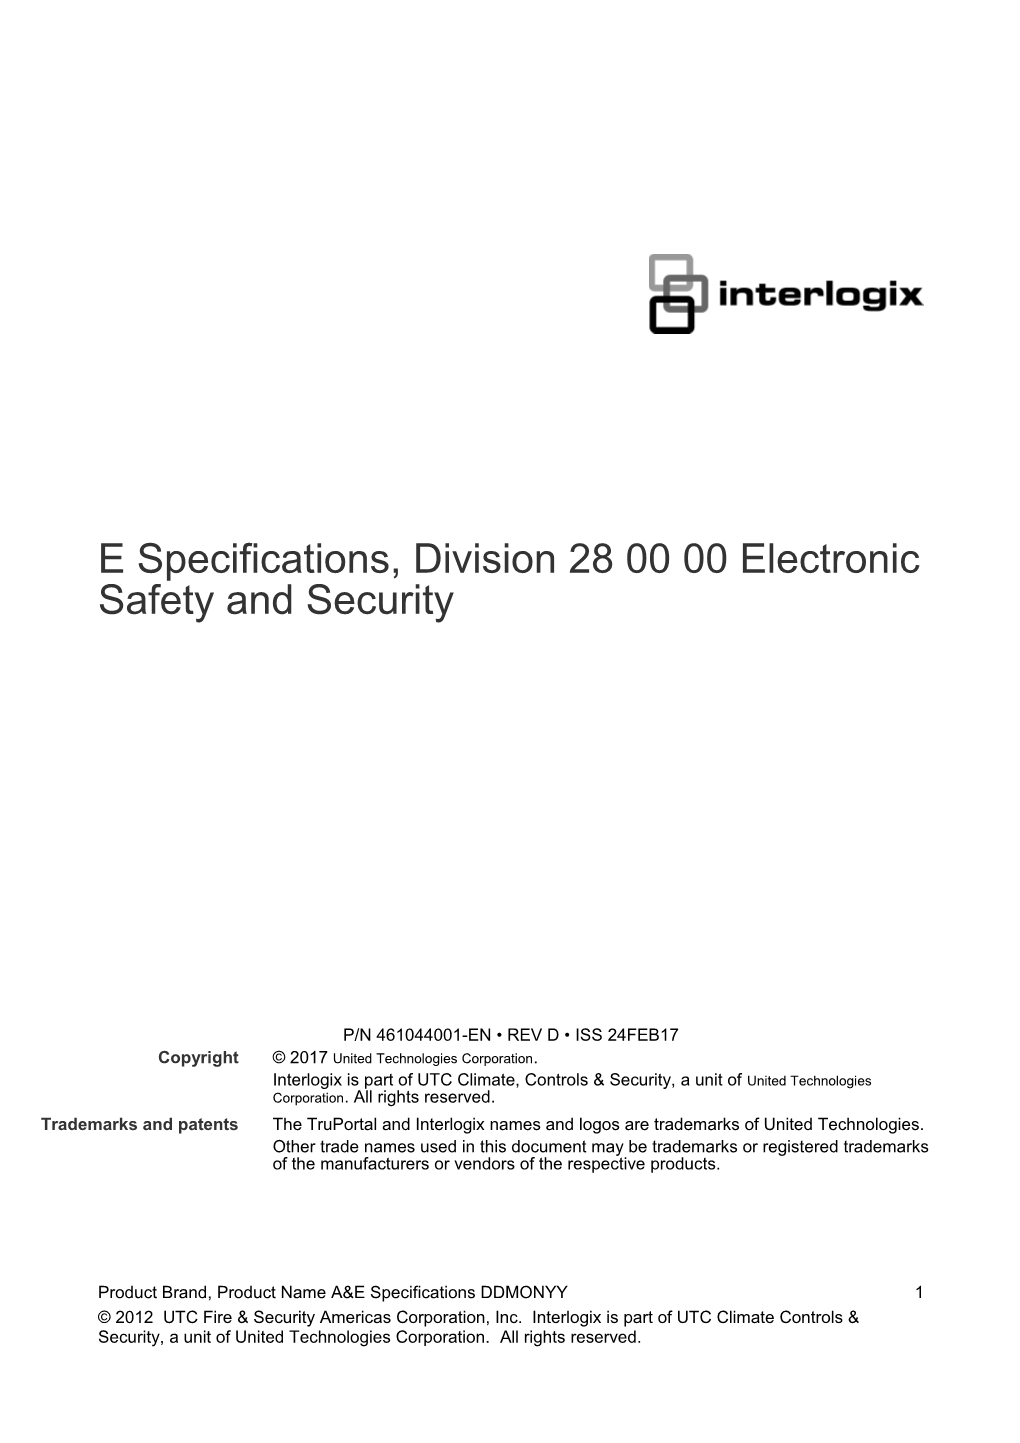 Truportal 1.6 A&E Specifications, Division 28 00 00 Electronic Safety and Security